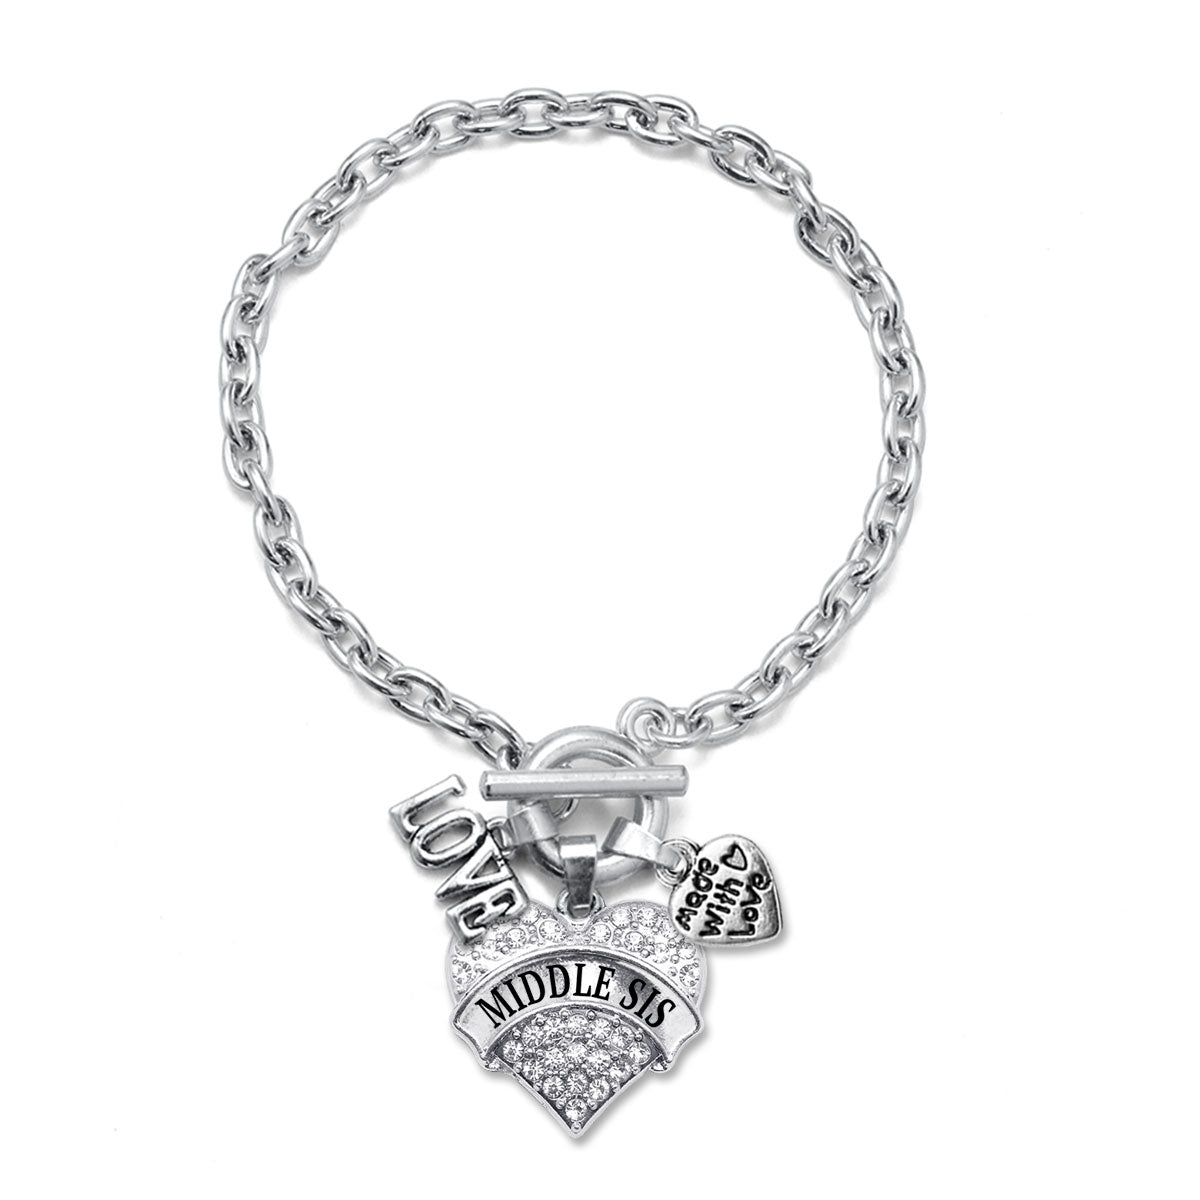 Silver Love Middle Sis Pave Heart Charm Toggle Bracelet